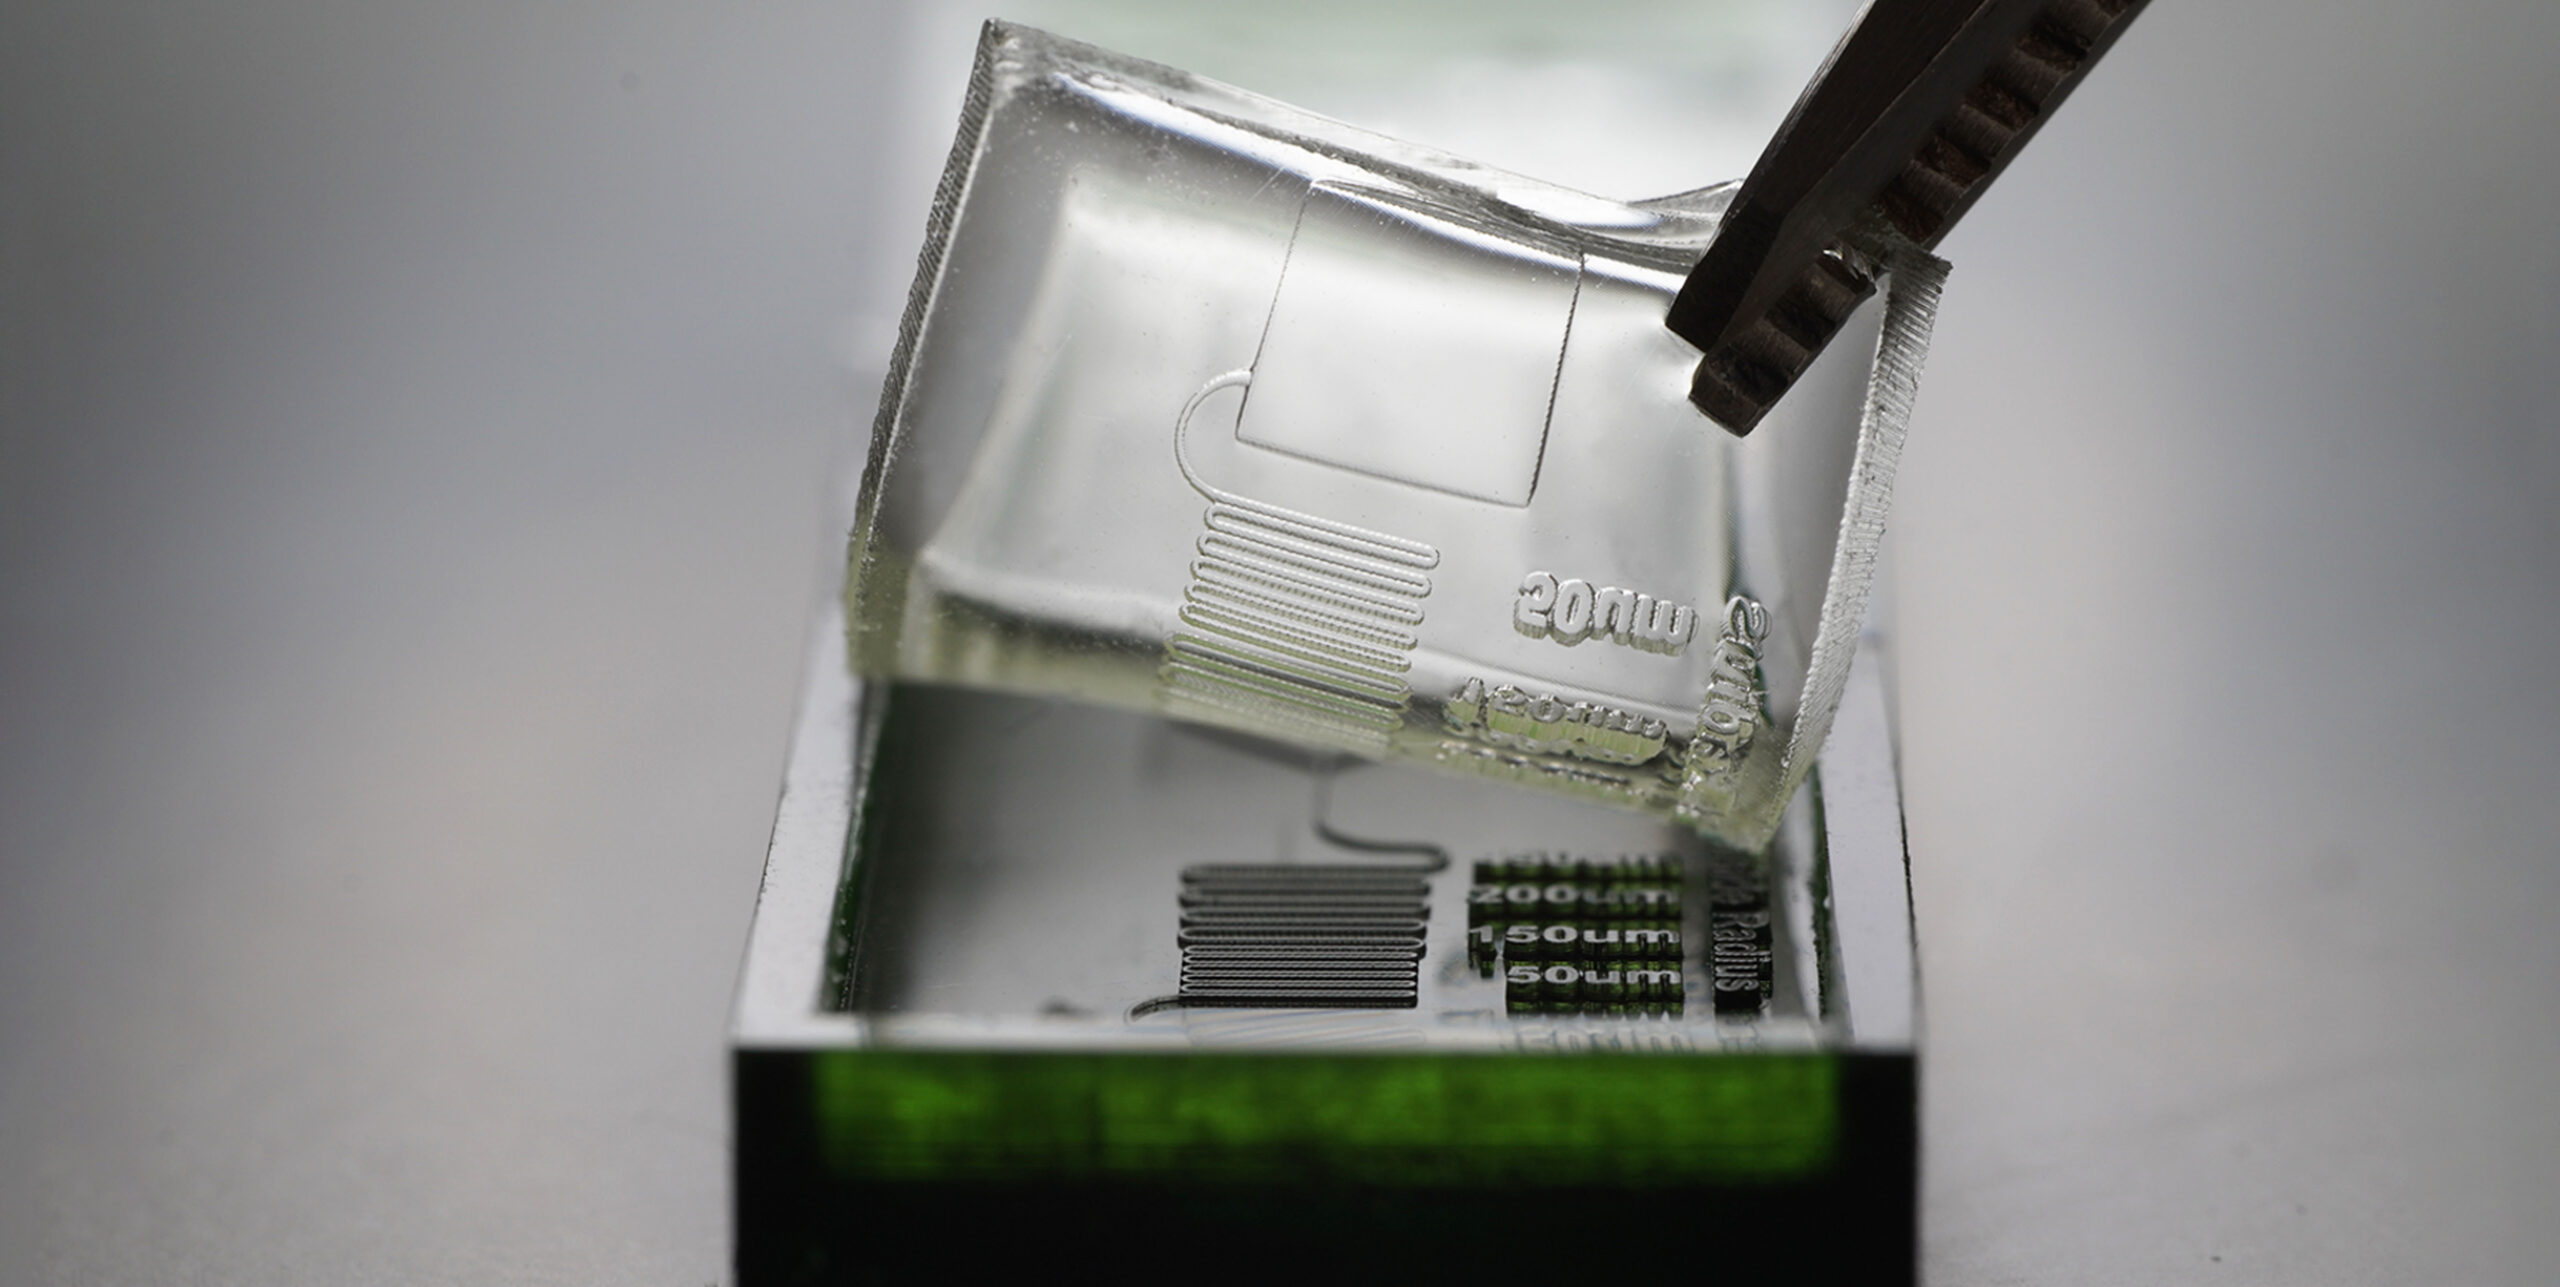 3D Printing has several microfluidic applications, a key example being PDMS Device fabrication. 3D Print Master Molds for PDMS with design features that are as small as 50µm